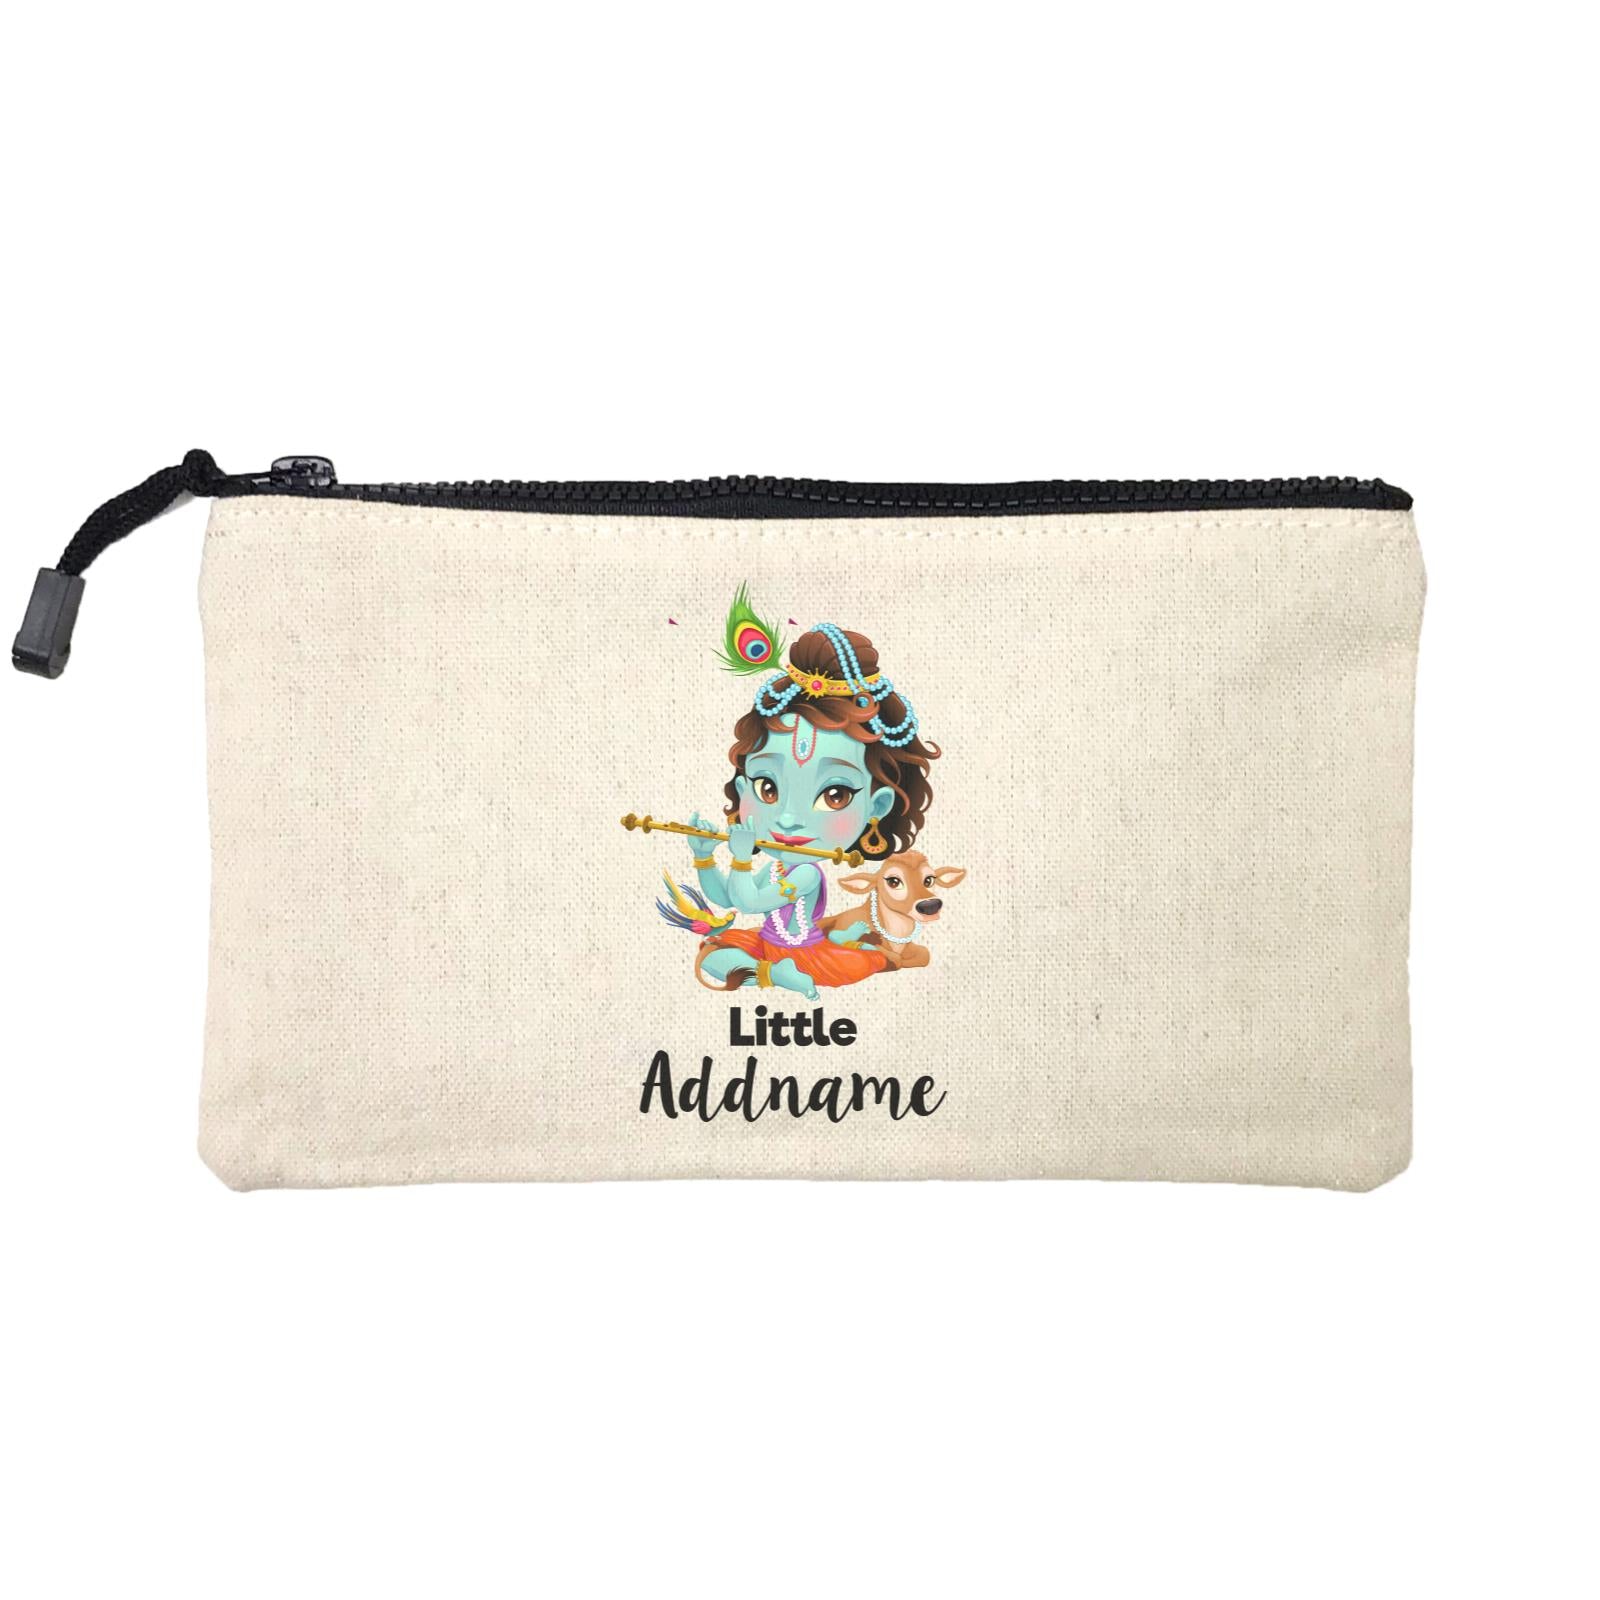 Artistic Krishna Playing Flute with Cow Little Addname Mini Accessories Stationery Pouch